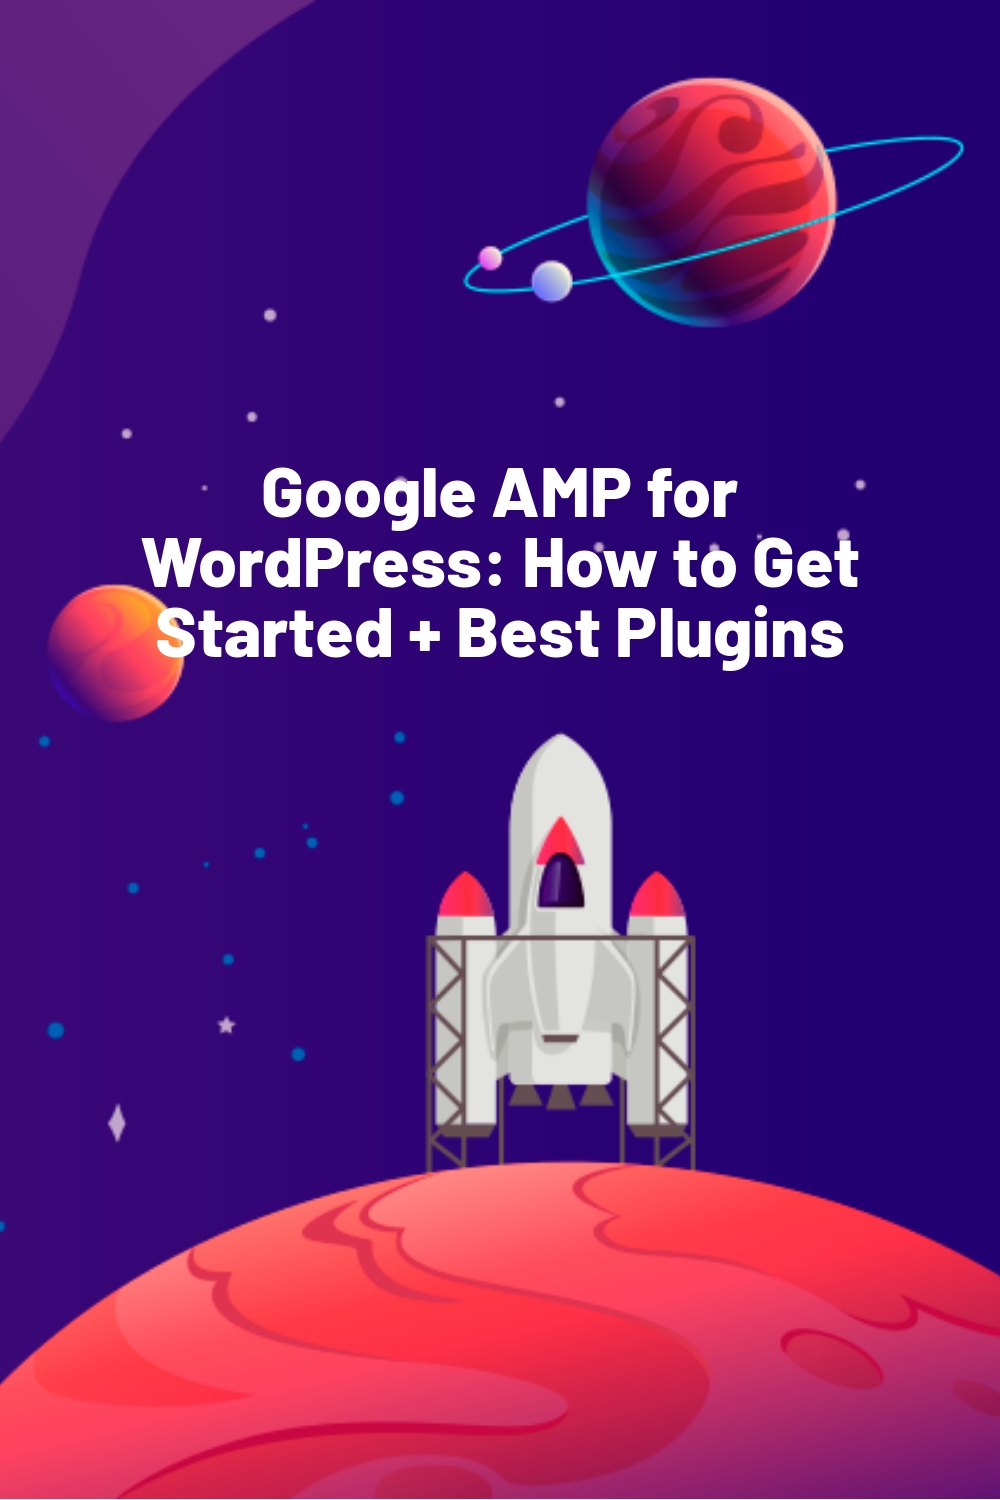 Google AMP for WordPress: How to Get Started + Best Plugins